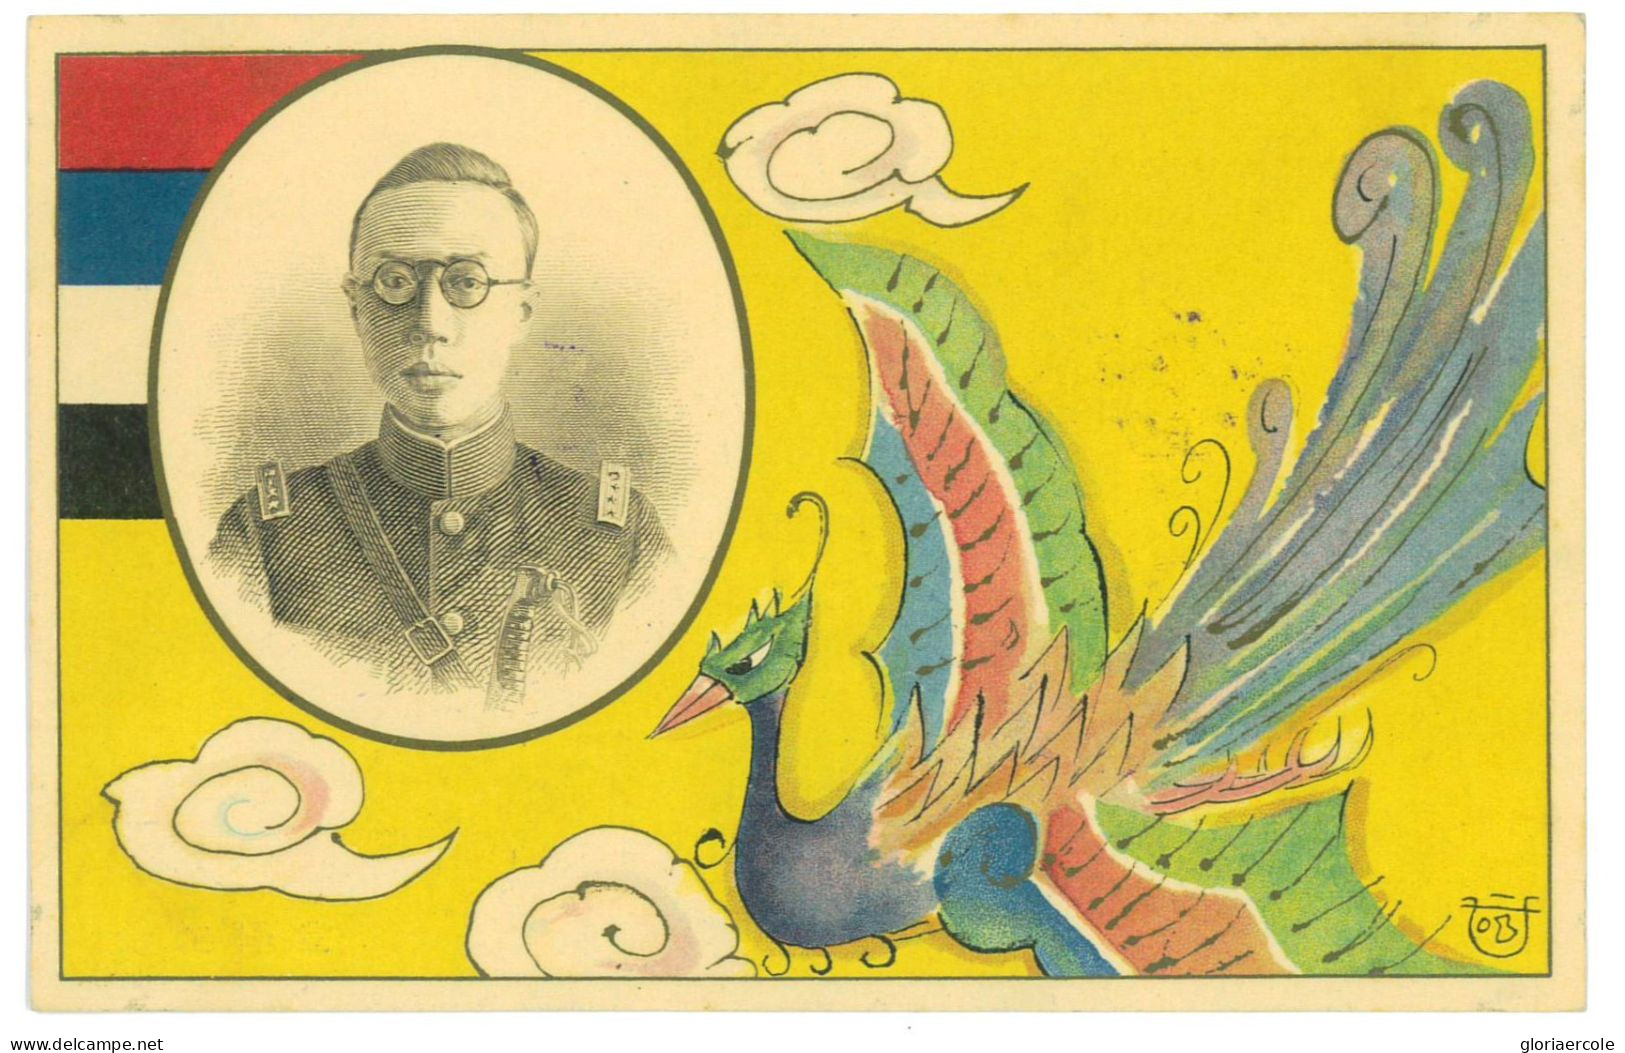 P2791 - CHINA/MANCHURIA MICHEL 23/26 WITH SPECIAL FDC CANCELLATION ON SPECIAL (BEAUTIFUL!!) POST CARD - 1932-45 Mandchourie (Mandchoukouo)